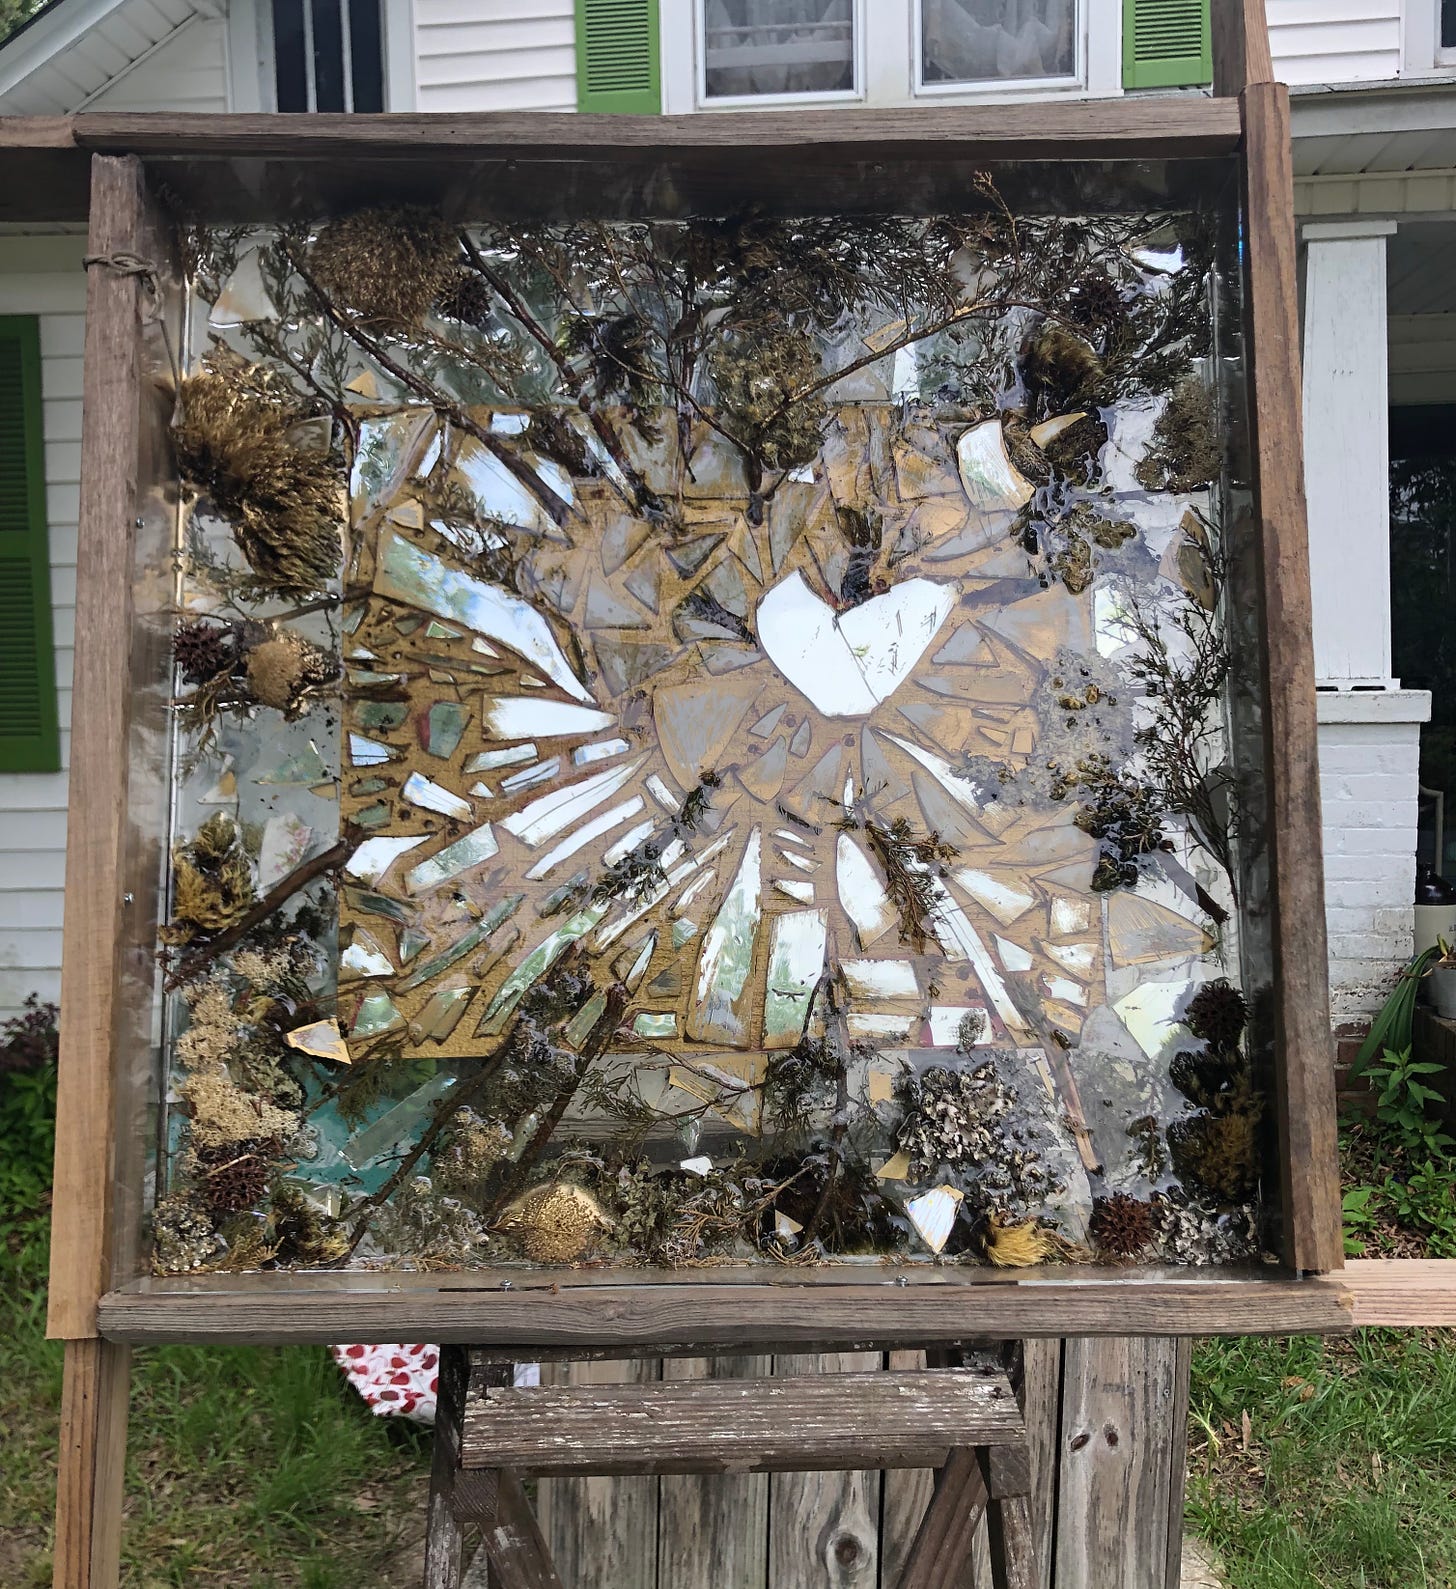 A mosaic made of glass with a heart at the center, surrounded by natural beach items, encased in a wooden box, sitting on a ladder, in front of a house.